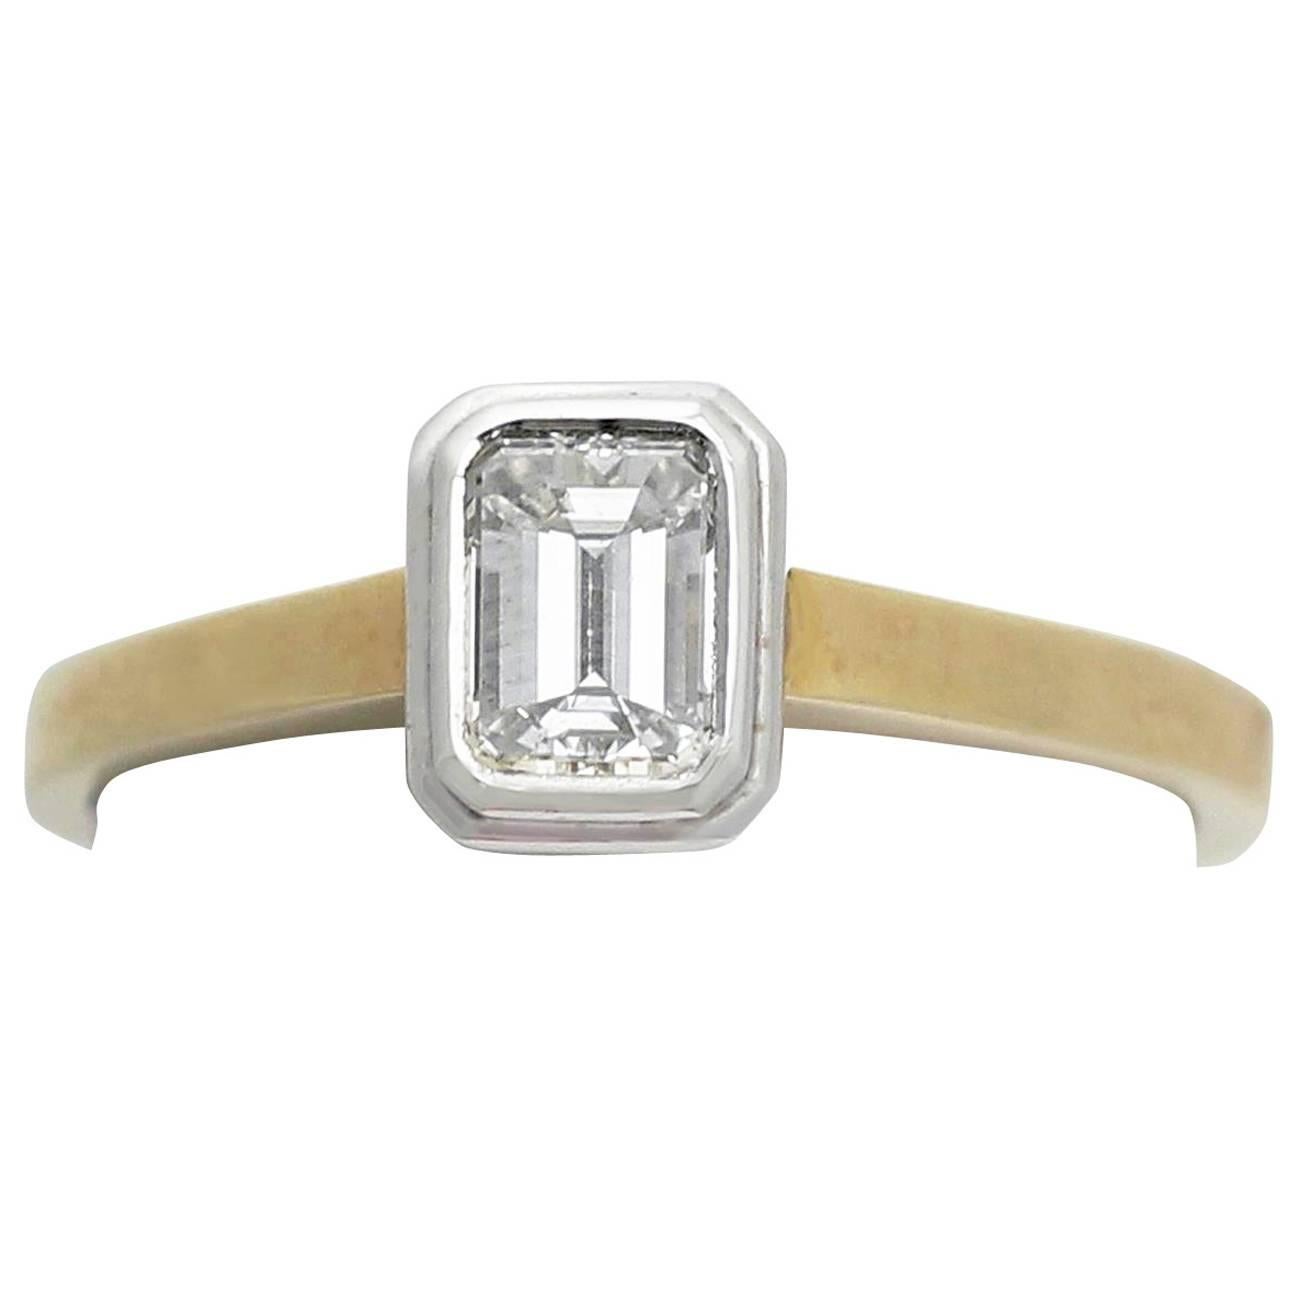 Diamond and Yellow Gold Solitaire Ring, Contemporary 2002